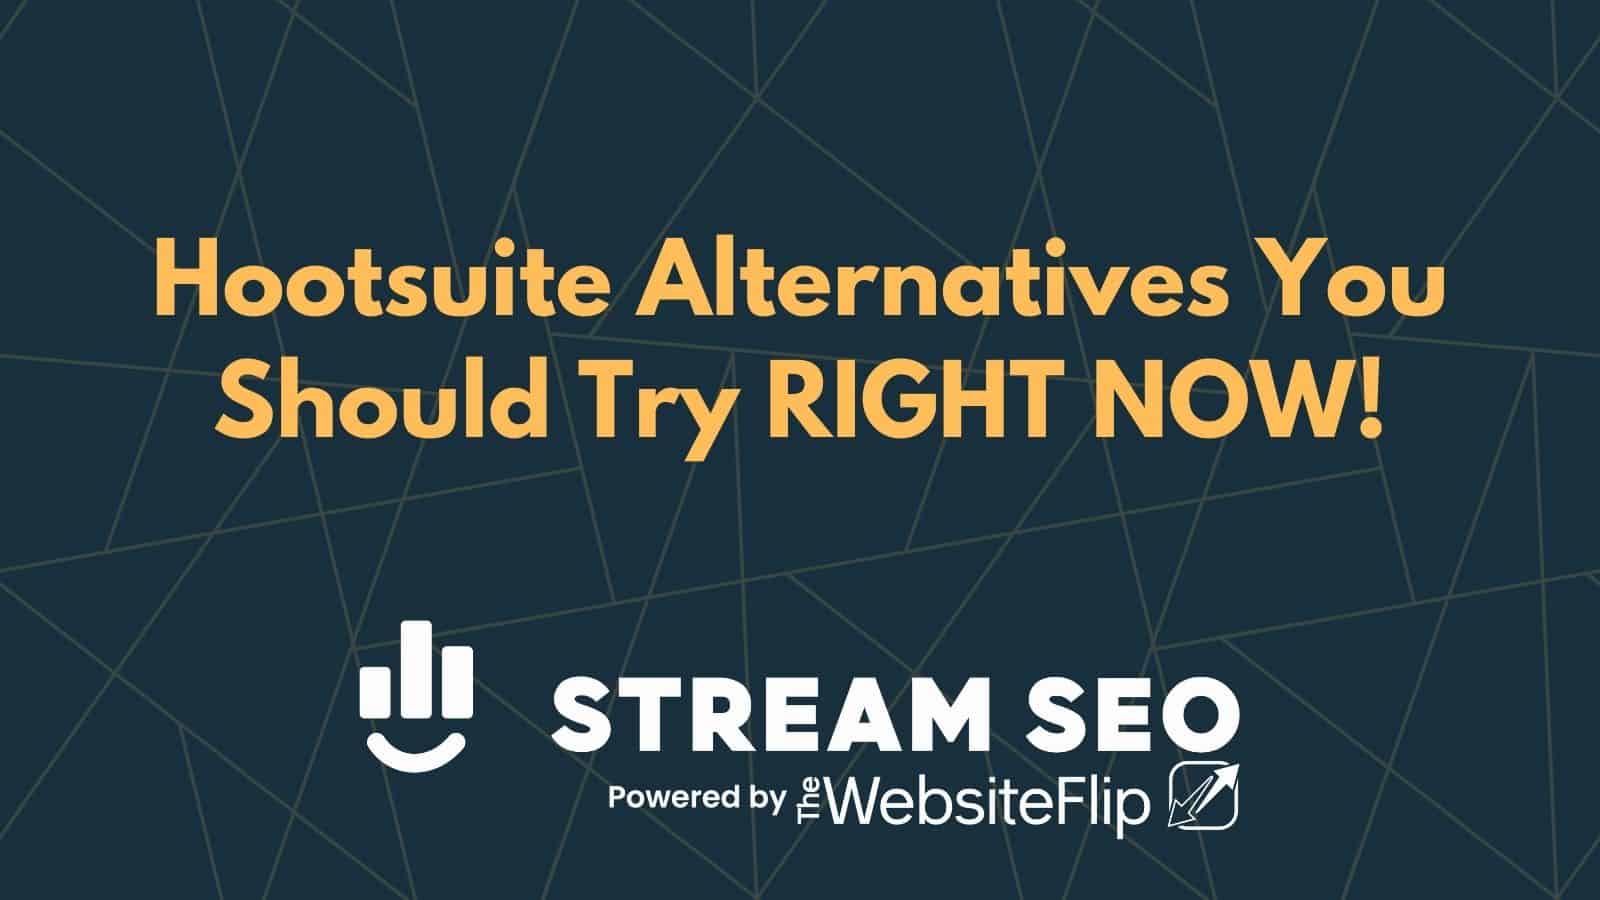 6 Hootsuite Alternatives You Should Try RIGHT NOW!